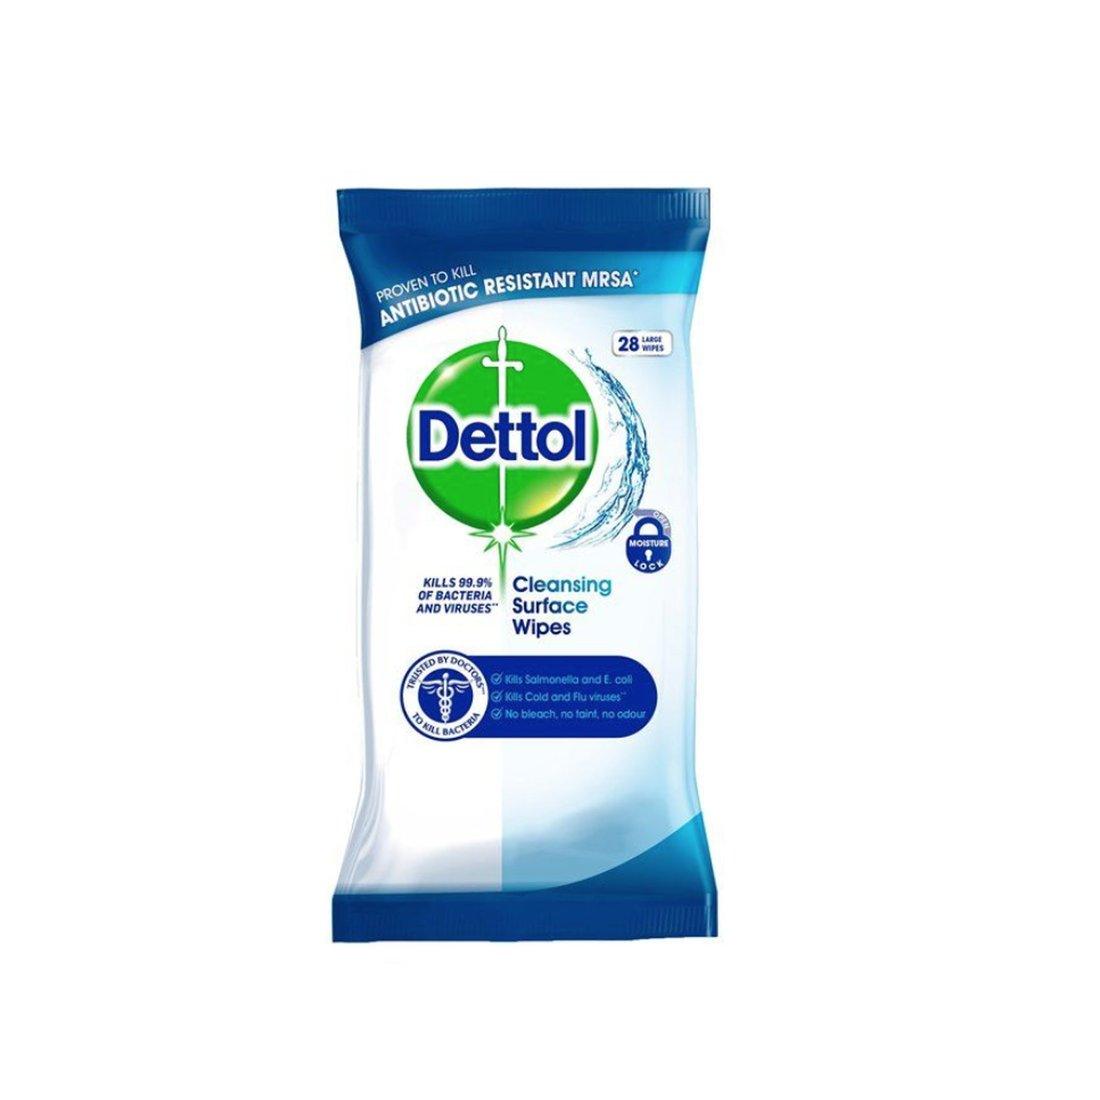 Dettol Anti-Bacterial Surface Wipes - Pack of 28 - Vending Superstore